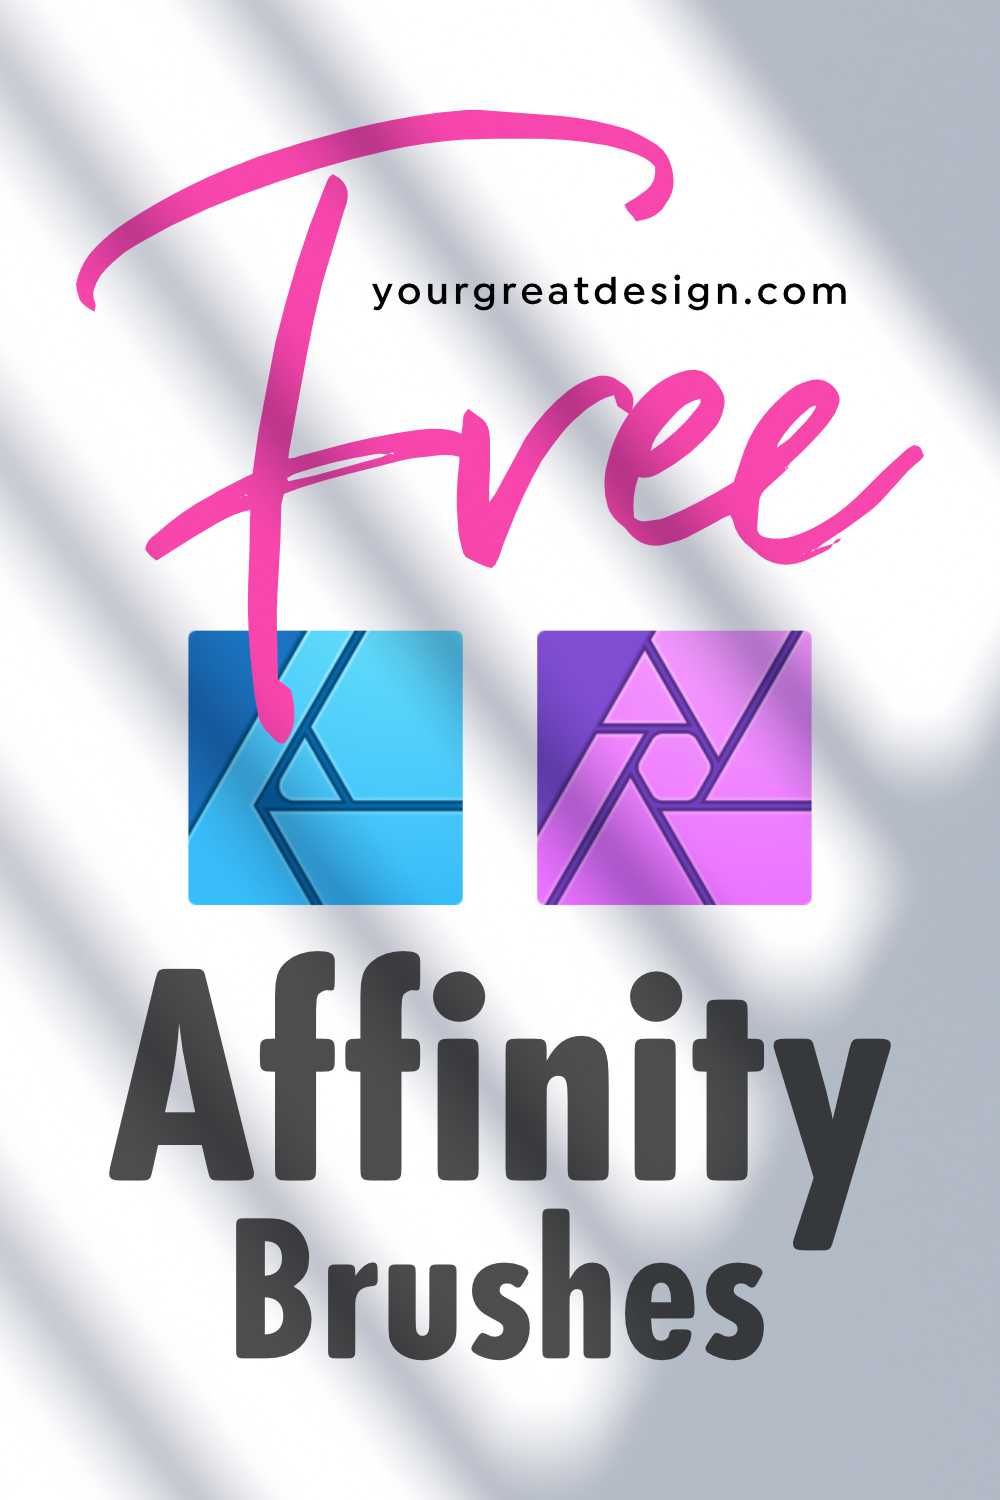 Download free brushes for Affinity Designer & Photo - 50% off with app purchase until 20 June